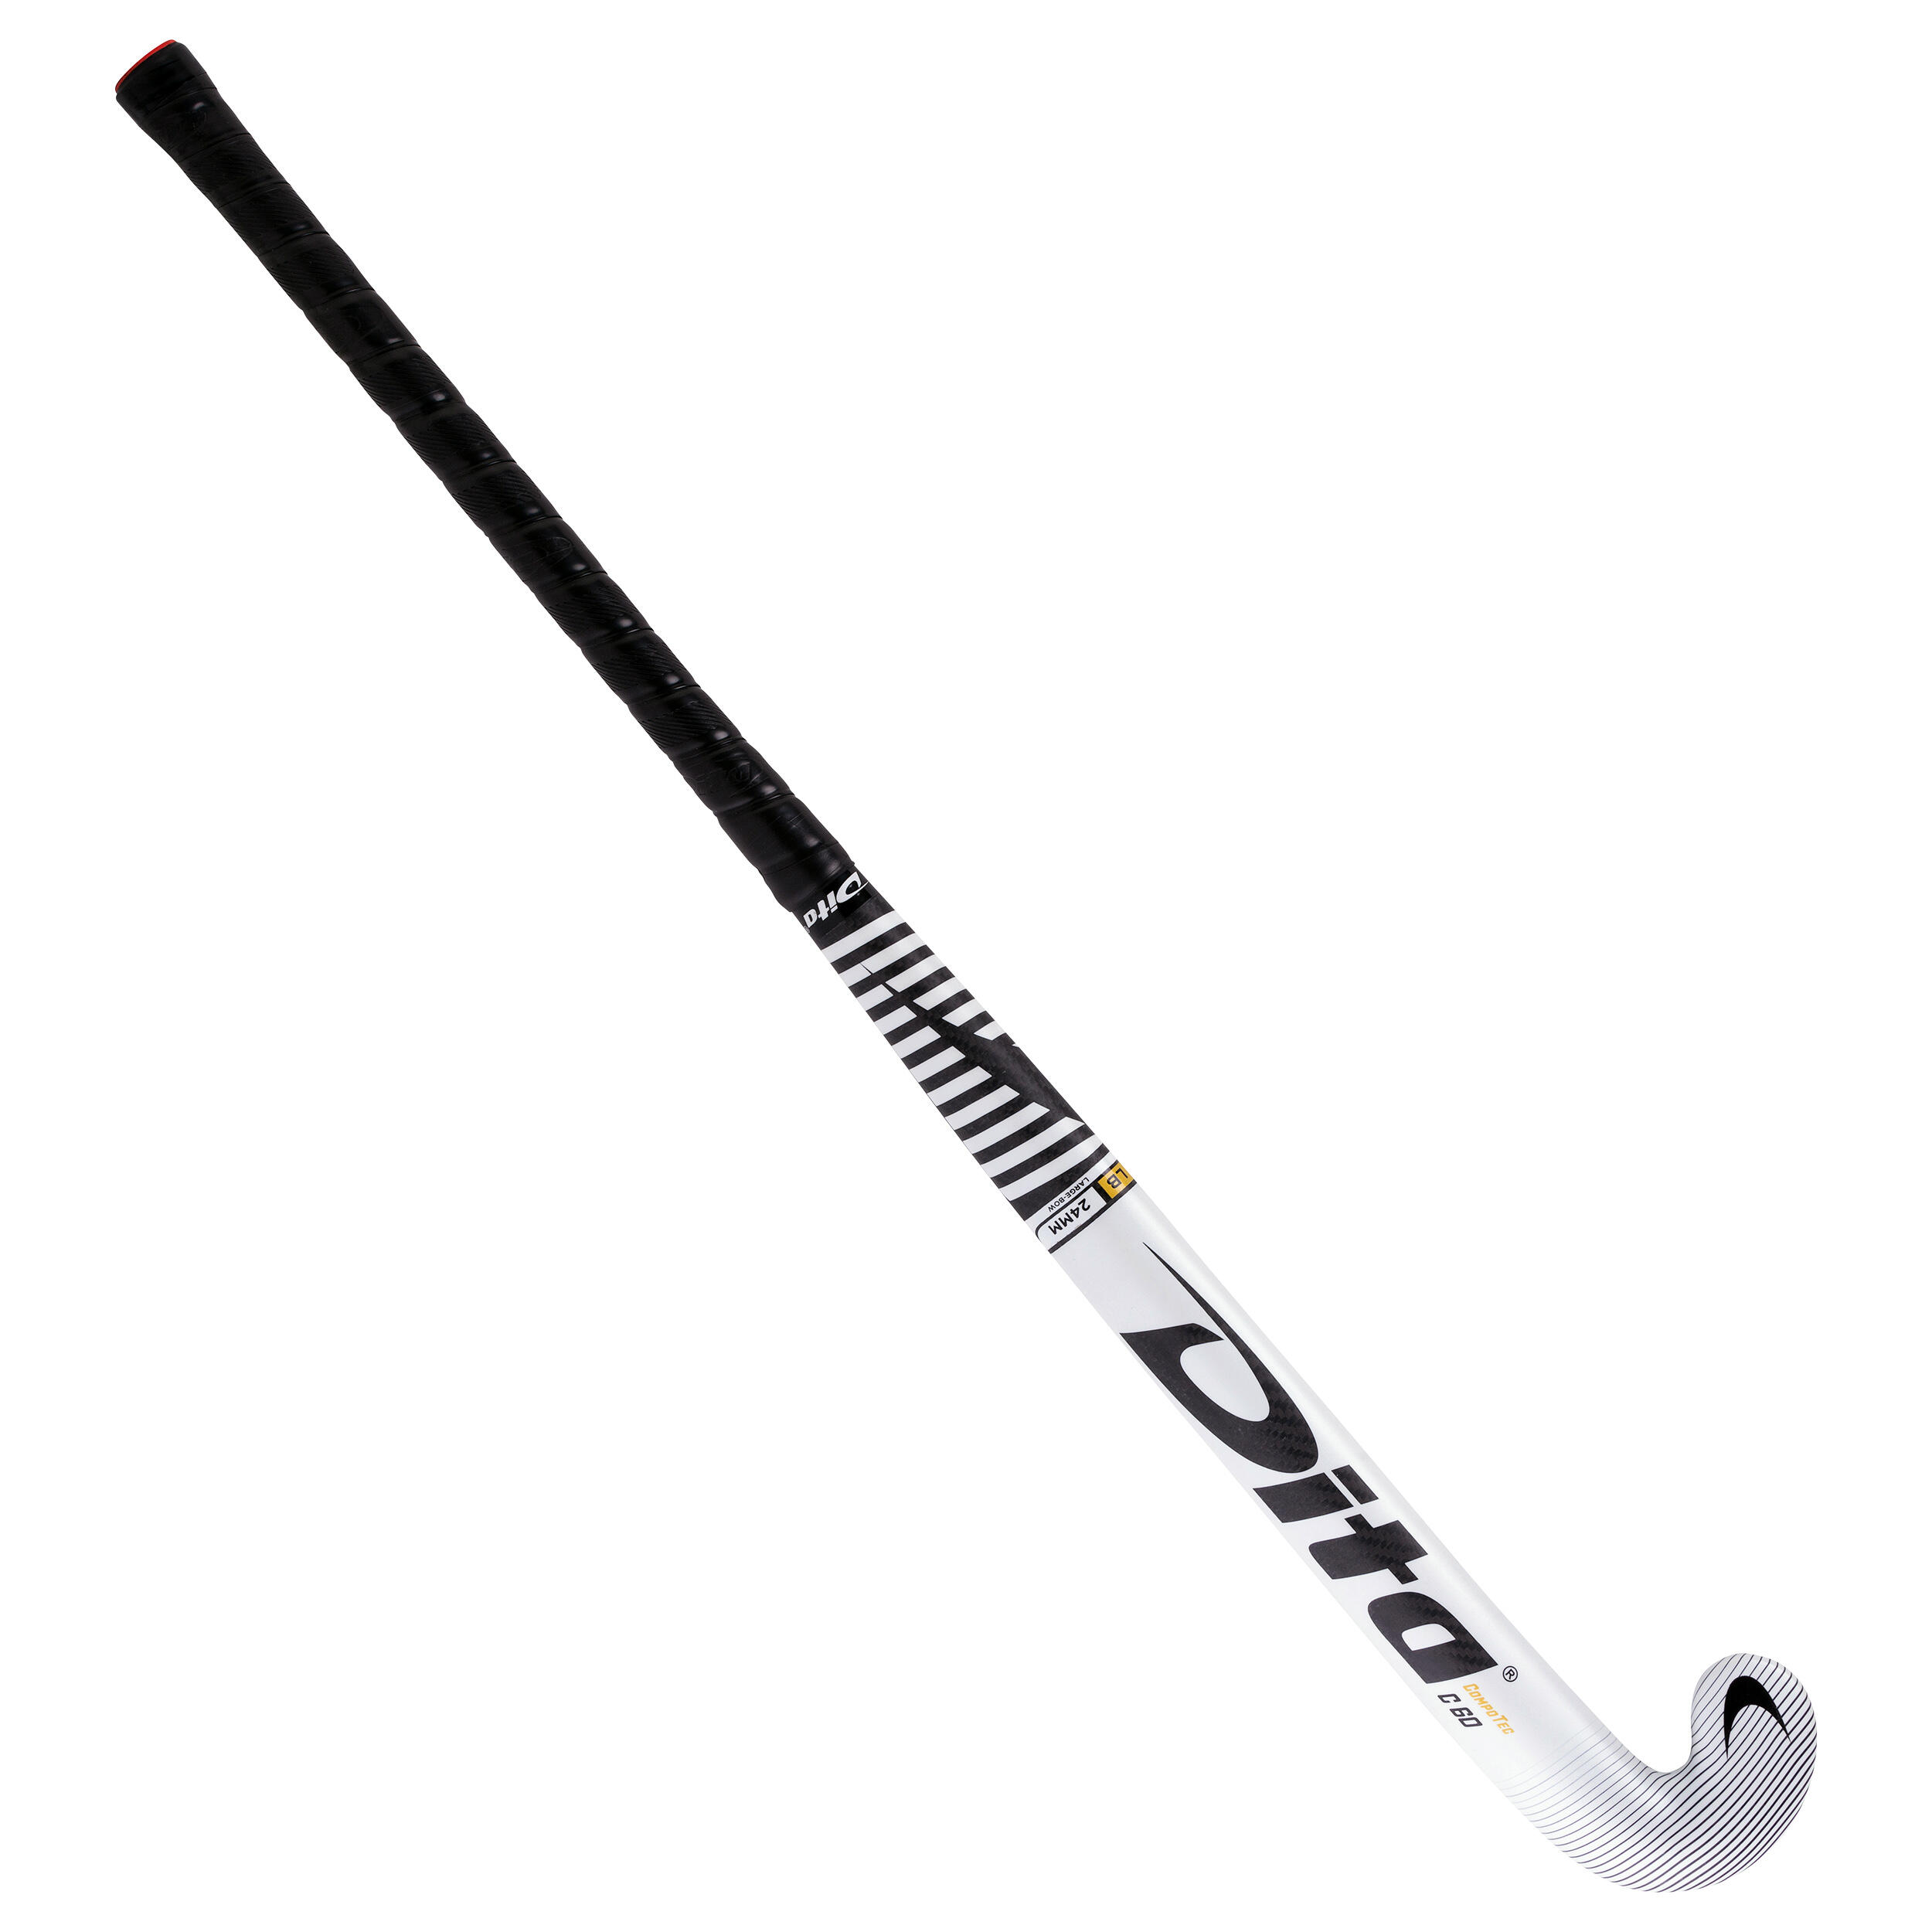 Adult Intermediate 60% Carbon Low Bow Field Hockey Stick CompotecC60 - White/Black 8/12